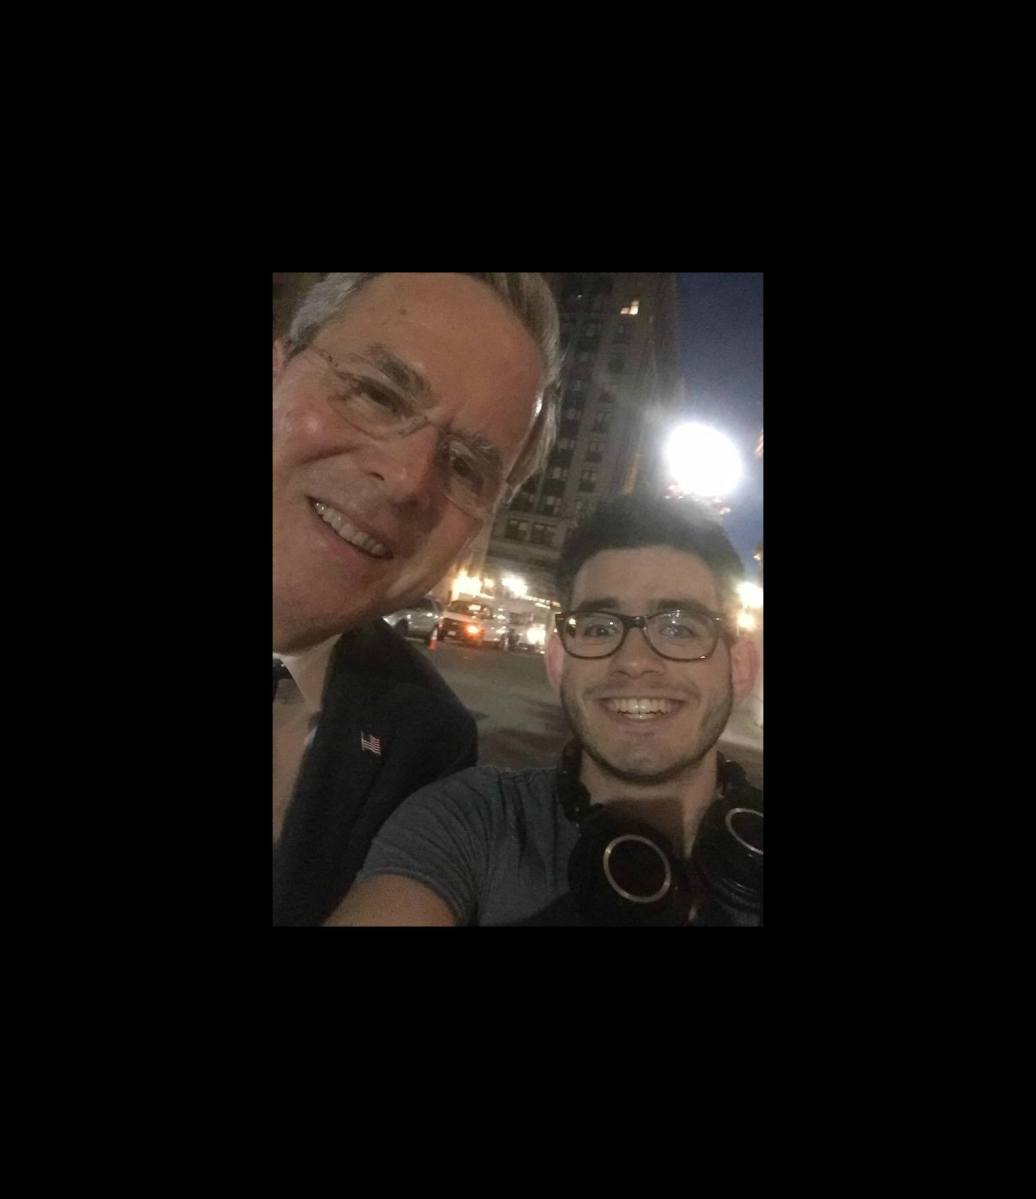 Jeb Bush spotted by Emerson student walking by himself in Boston